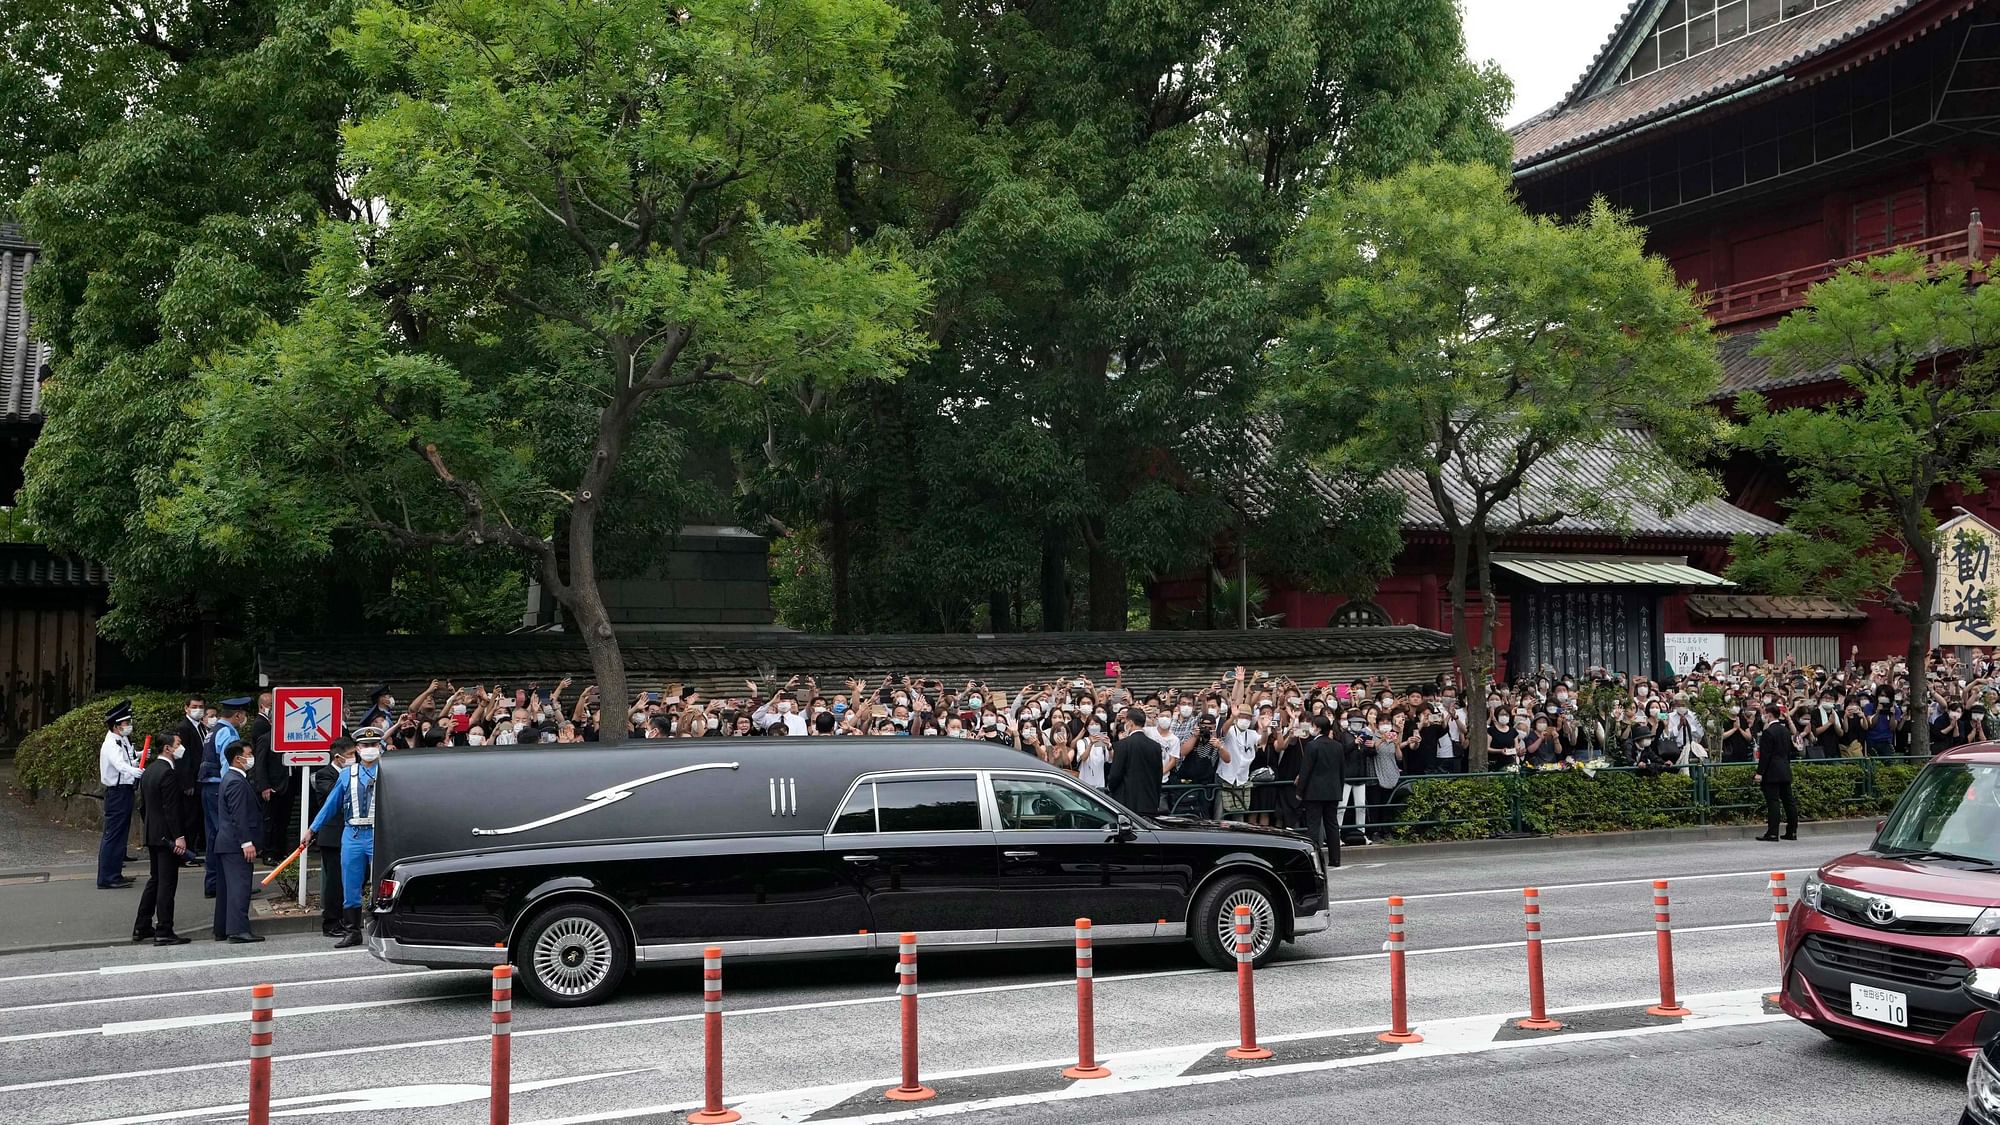 <div class="paragraphs"><p>The vehicle carrying the body of late former Japanese Prime Minister Shinzo Abe leaves Zojoji temple after his funeral in Tokyo.</p></div>